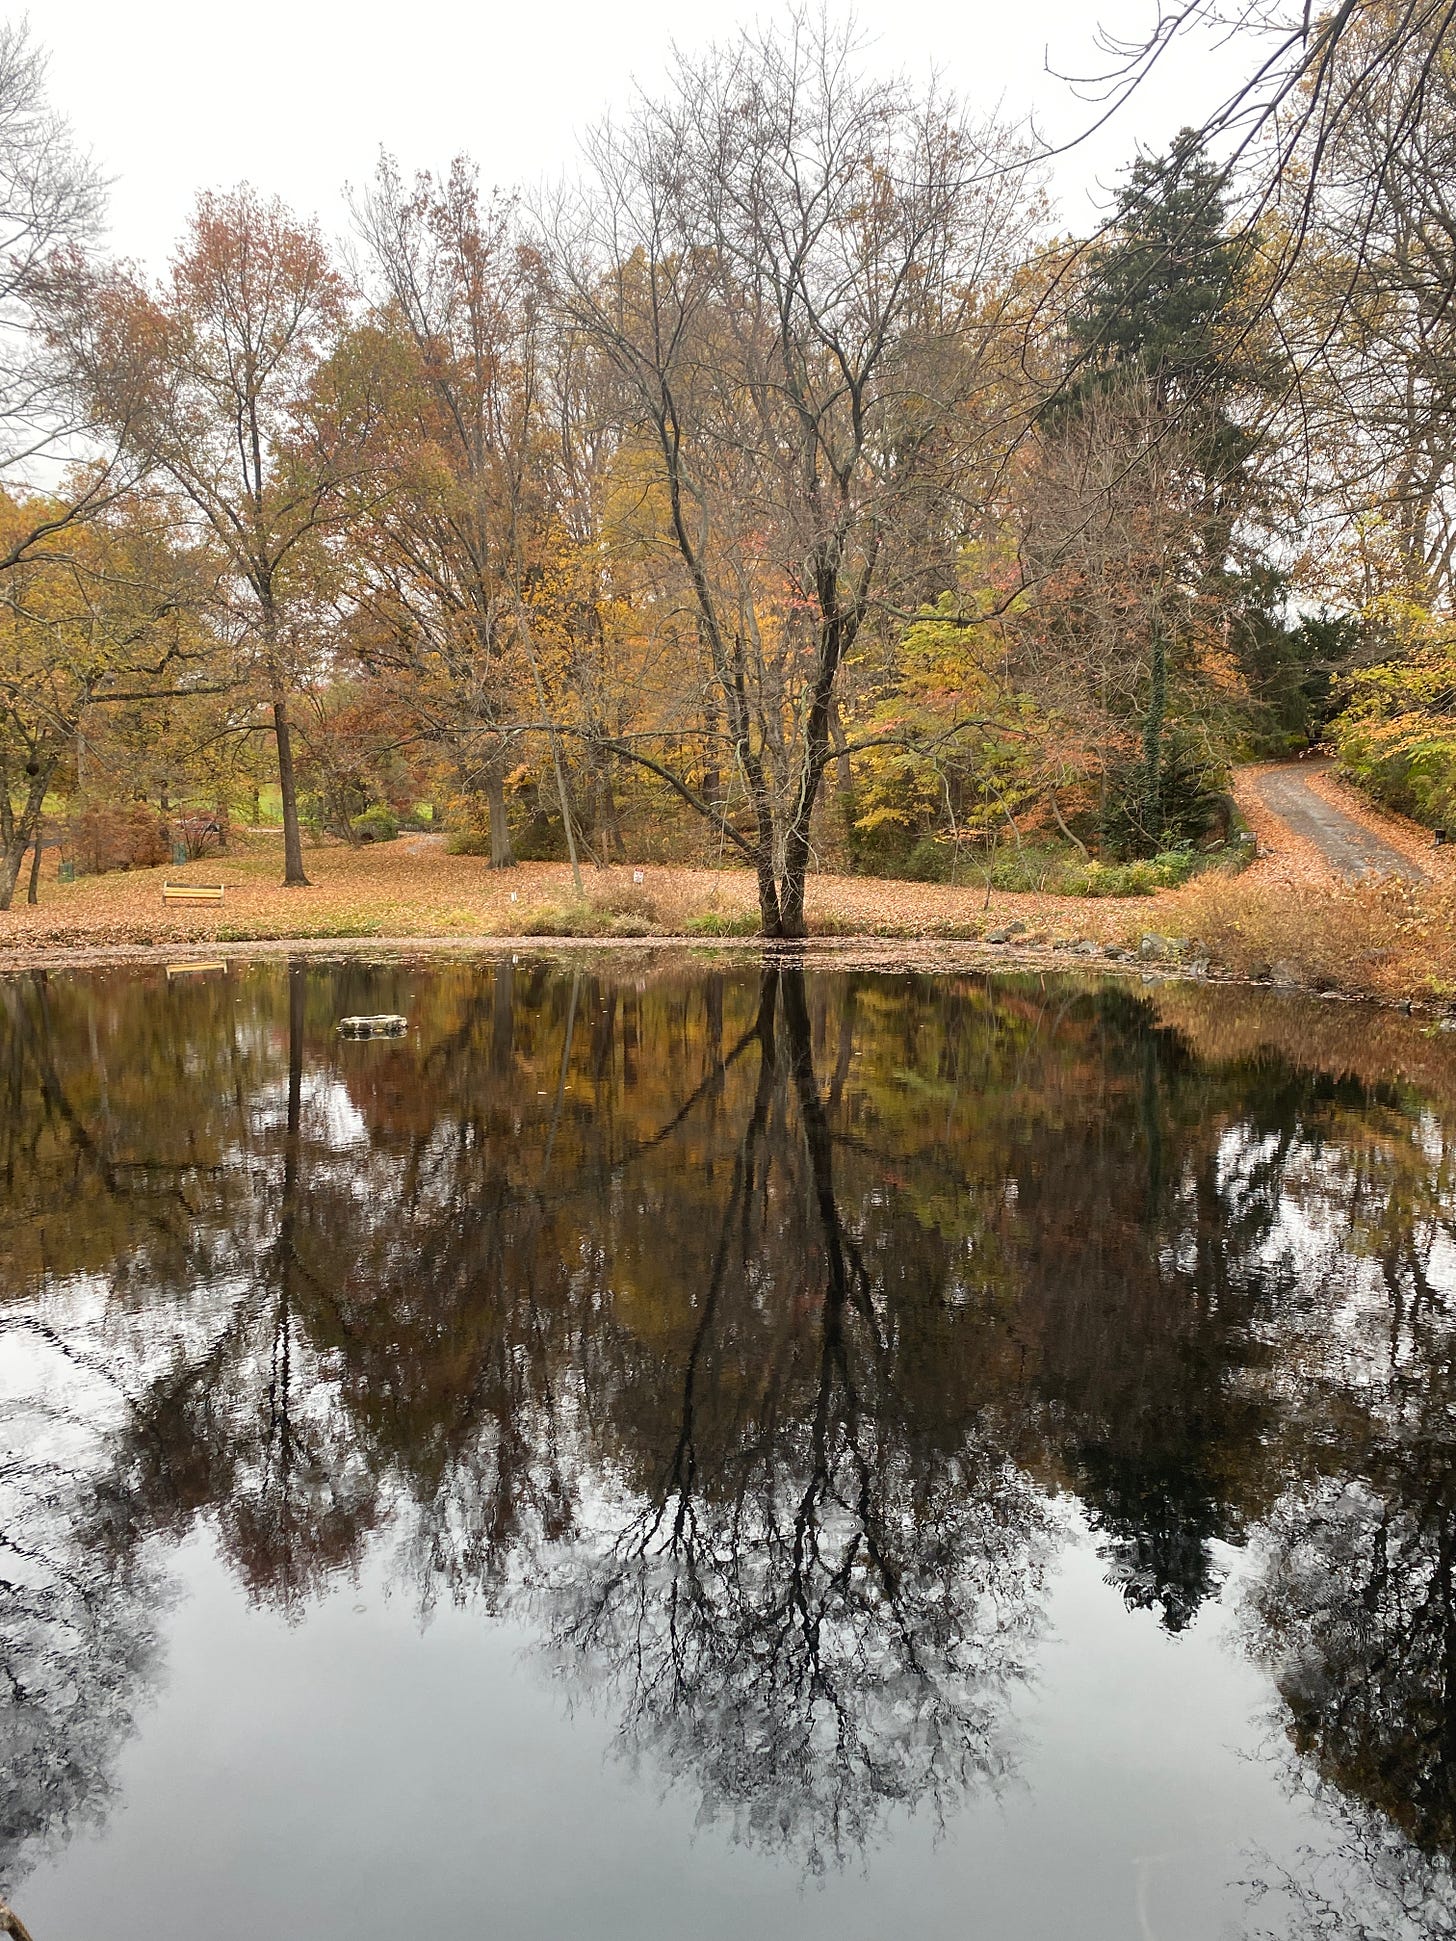 trees with leaves falling reflected in a pond